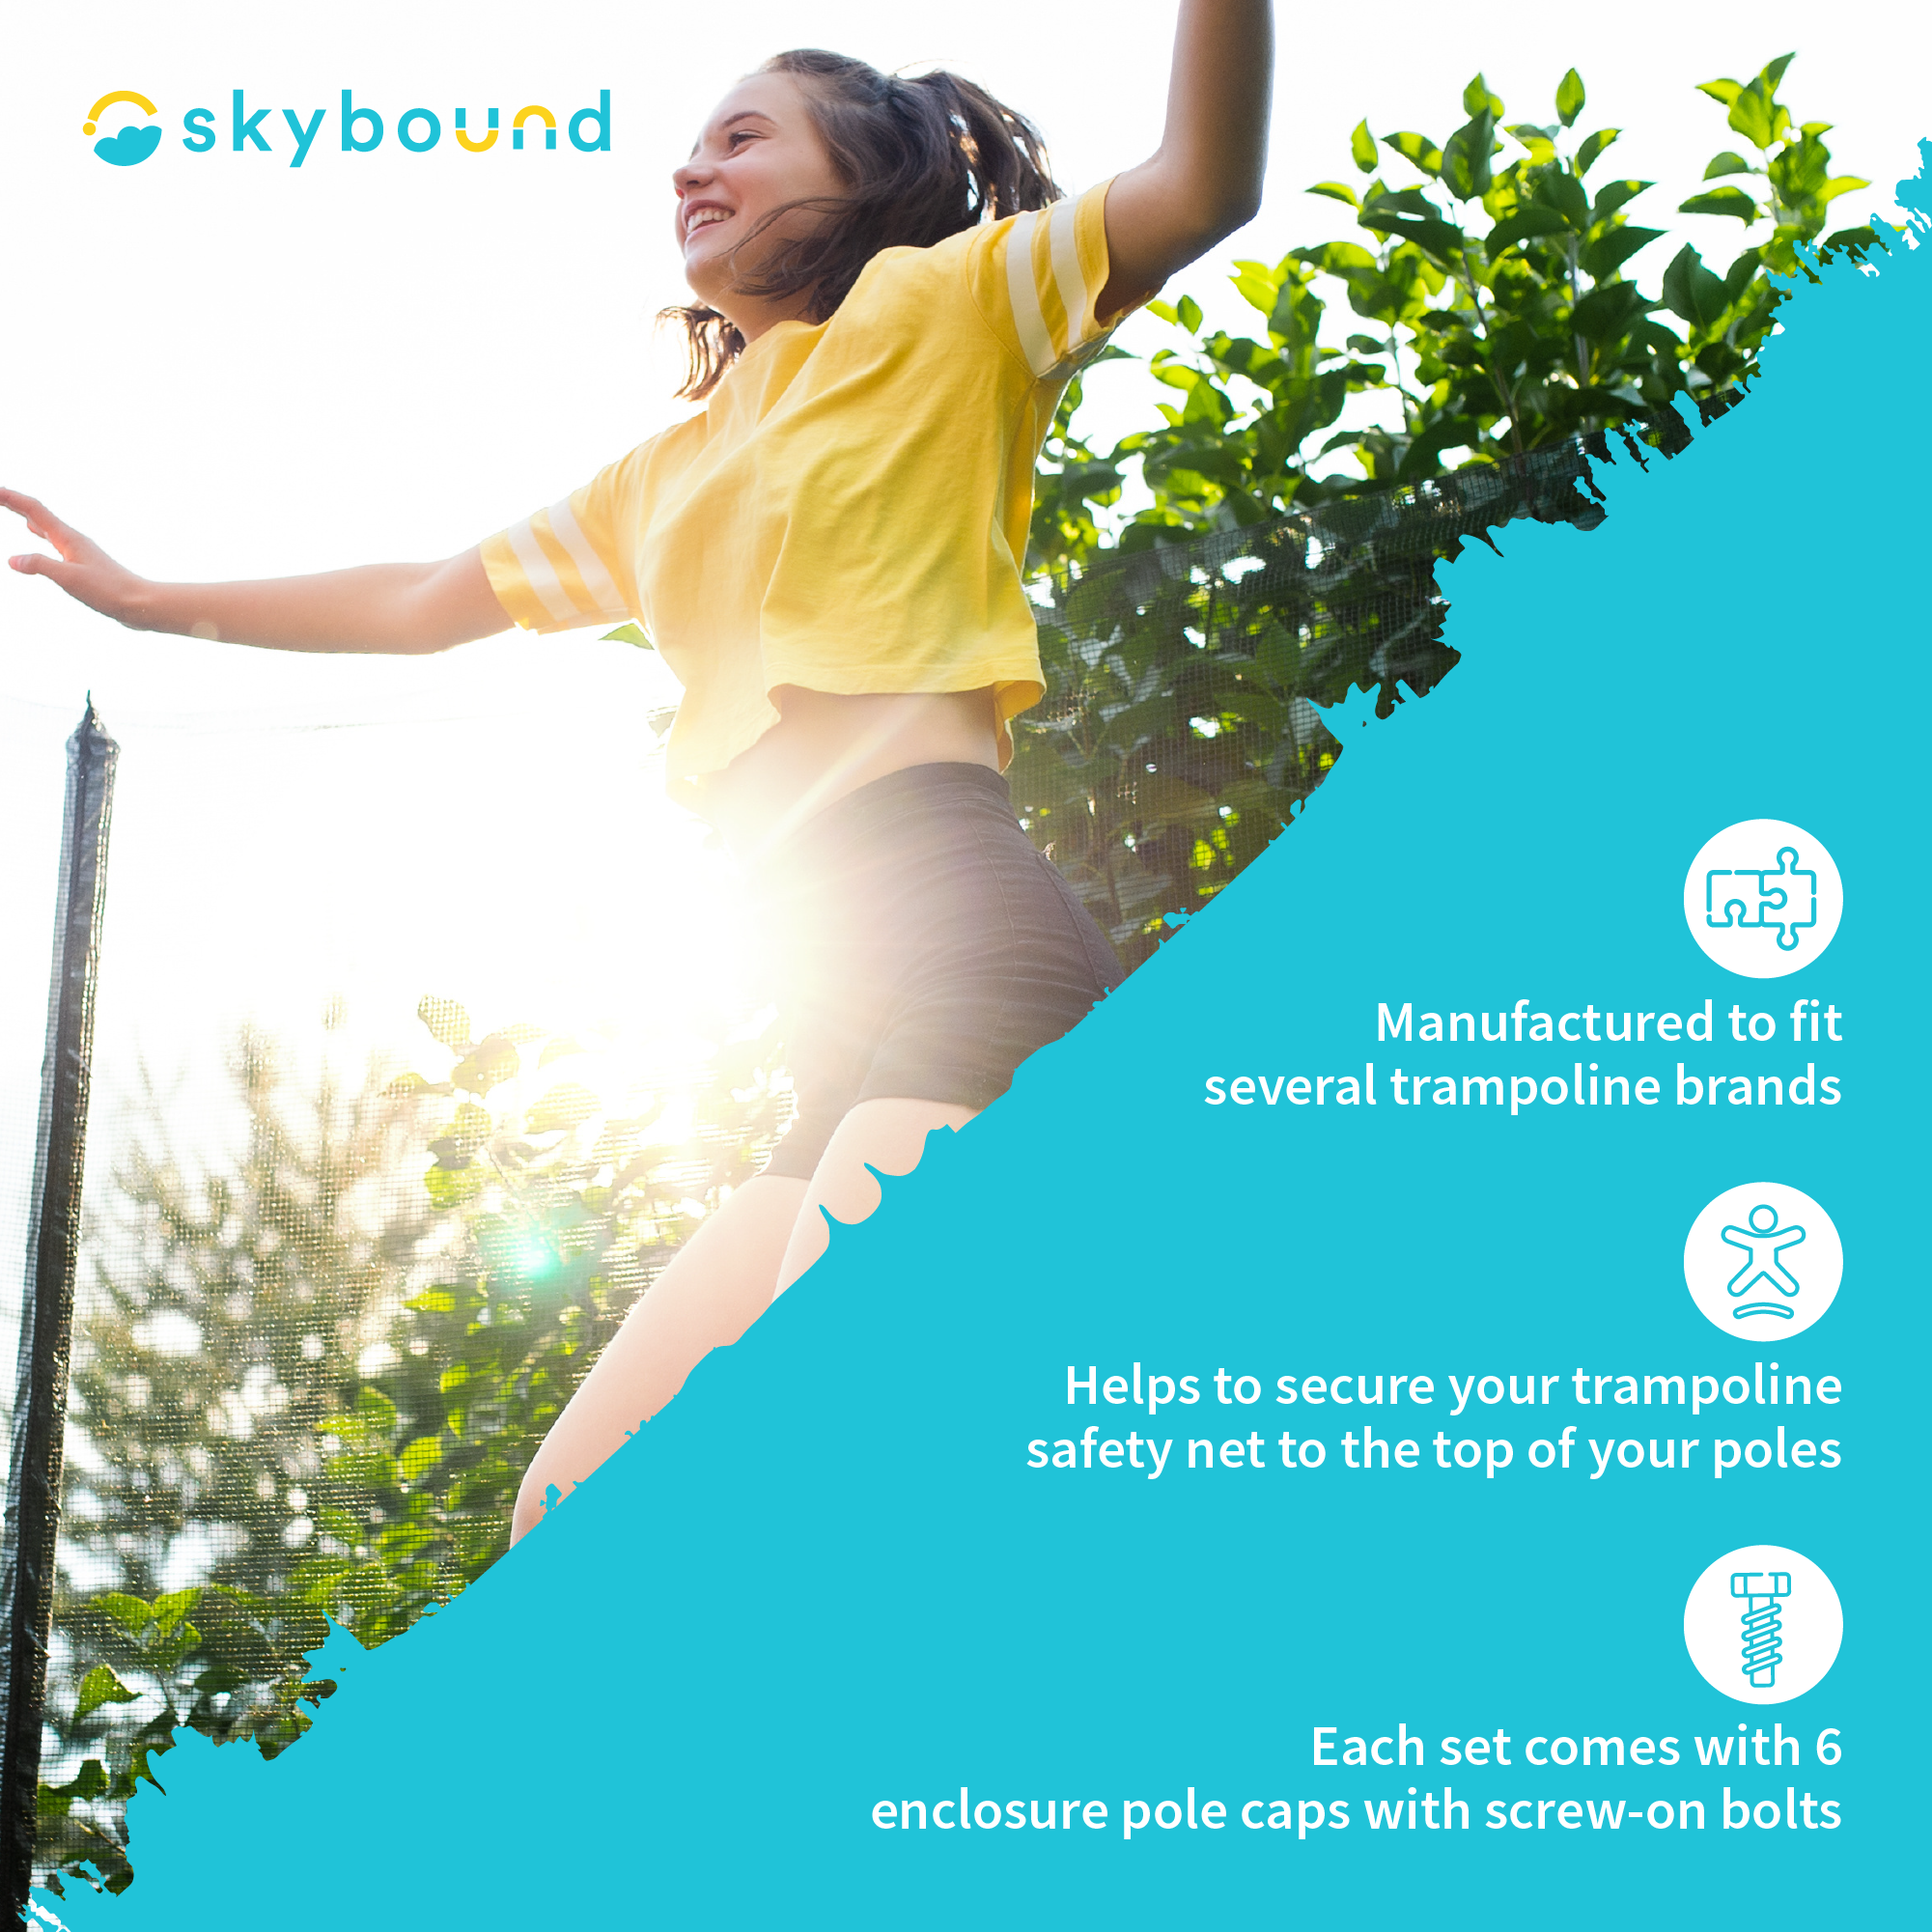 Girl jumping on Trampoline:  SkyBound- Products are manufactured to fit several trampoline brands.  Helps to secure your trampoline safety net to the top of your poles.  Each set comes with 6 enclosure pole caps with screw-on bolts.  